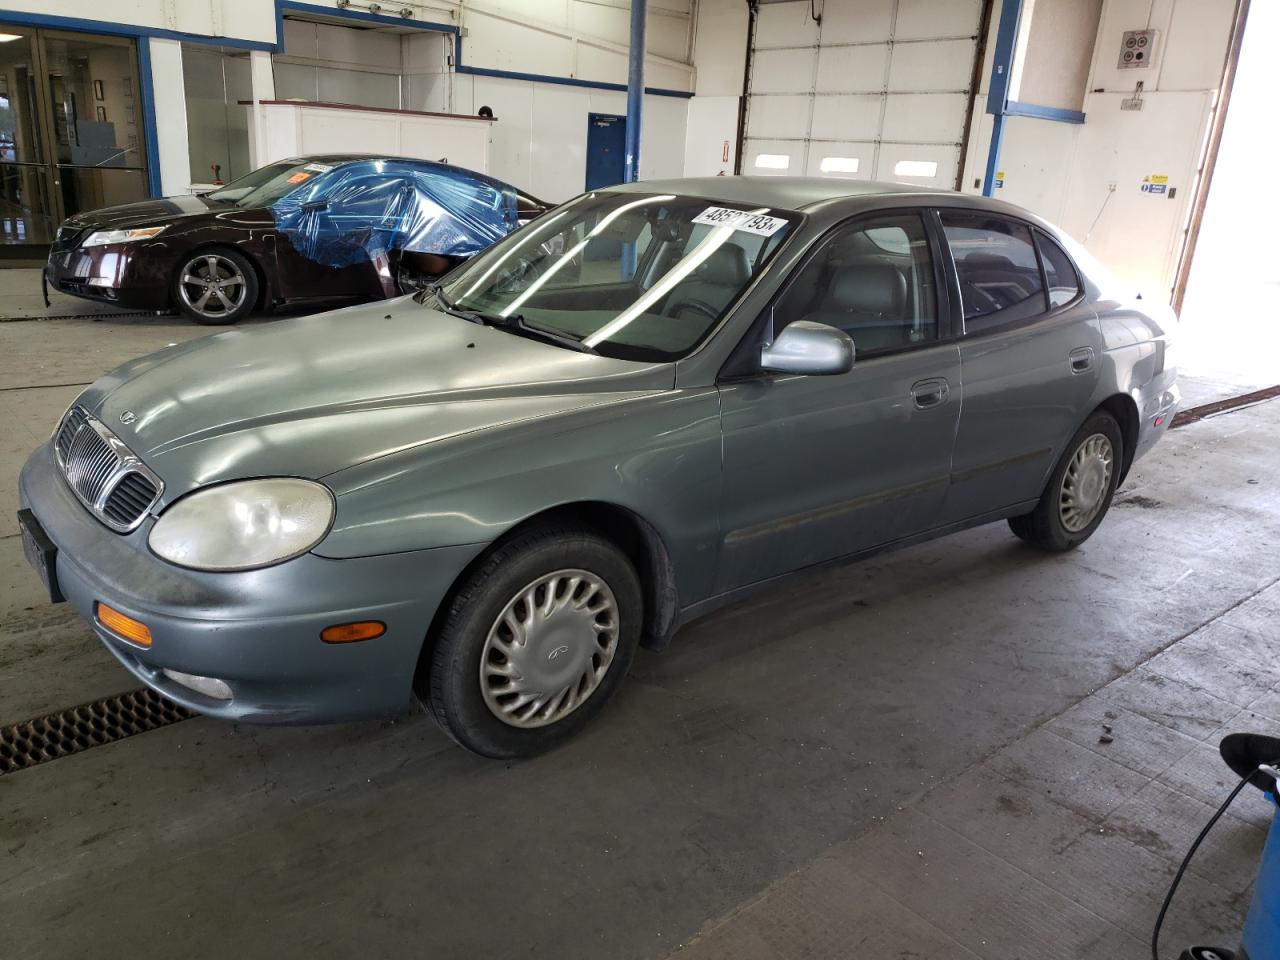 2001 Daewoo Leganza CDX for sale at Copart Pasco, WA Lot #48537*** |  SalvageReseller.com